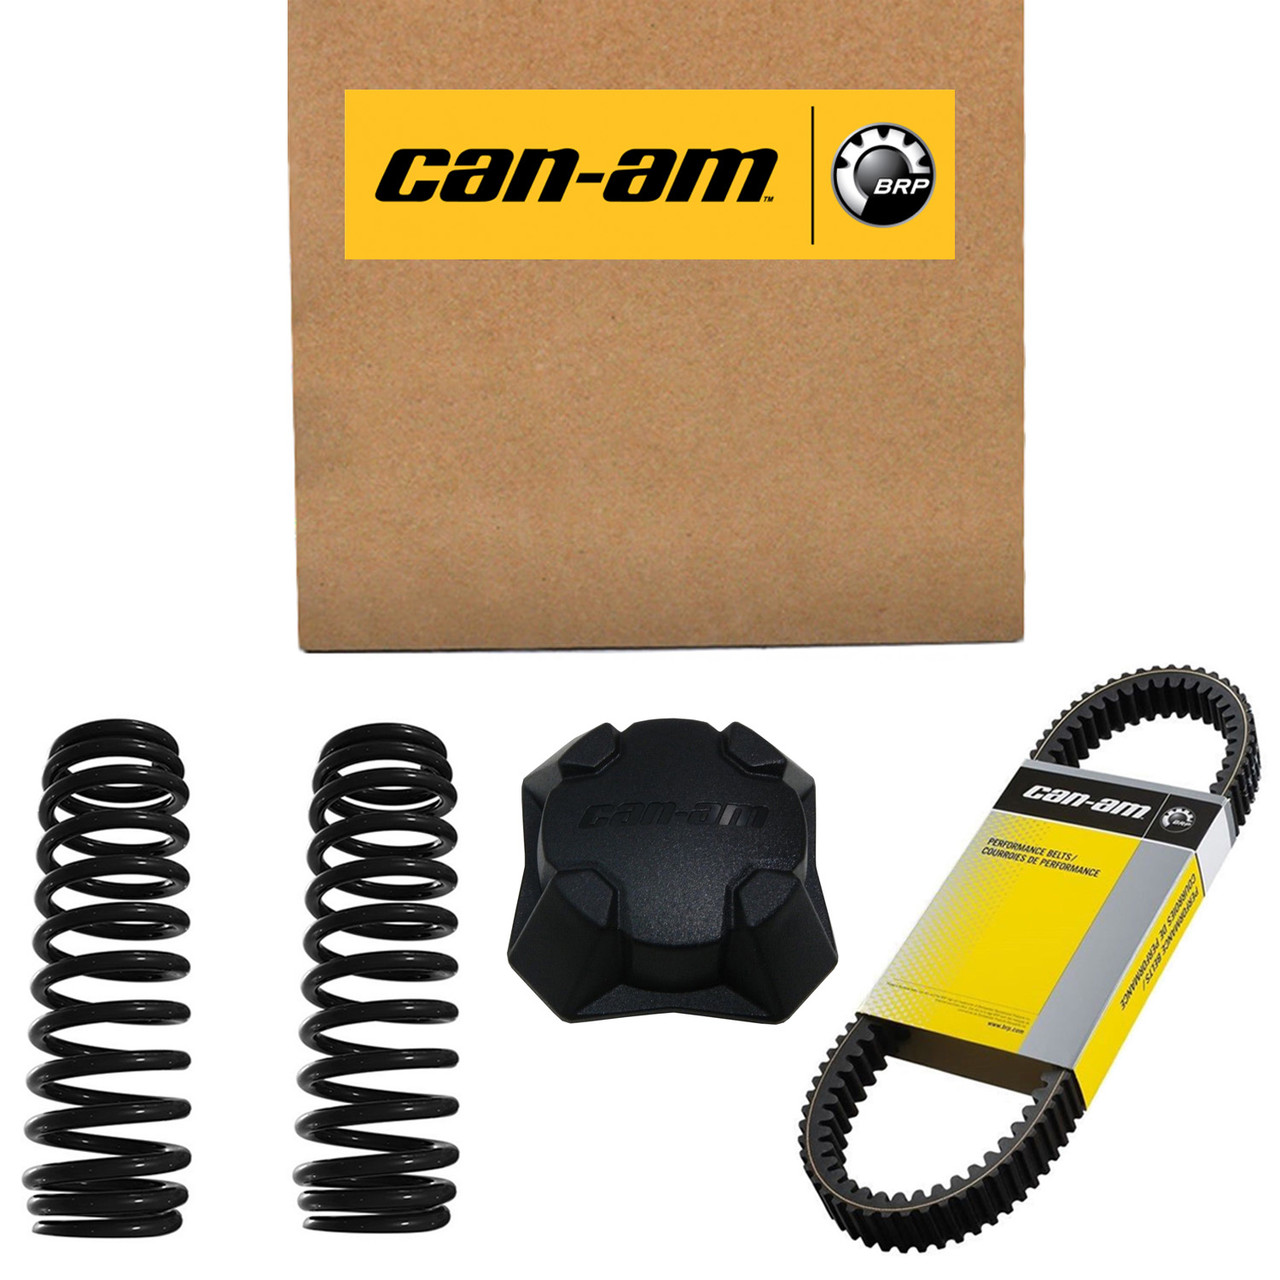 Can-Am New OEM Lh Acces Panel Jet Black, 708400271